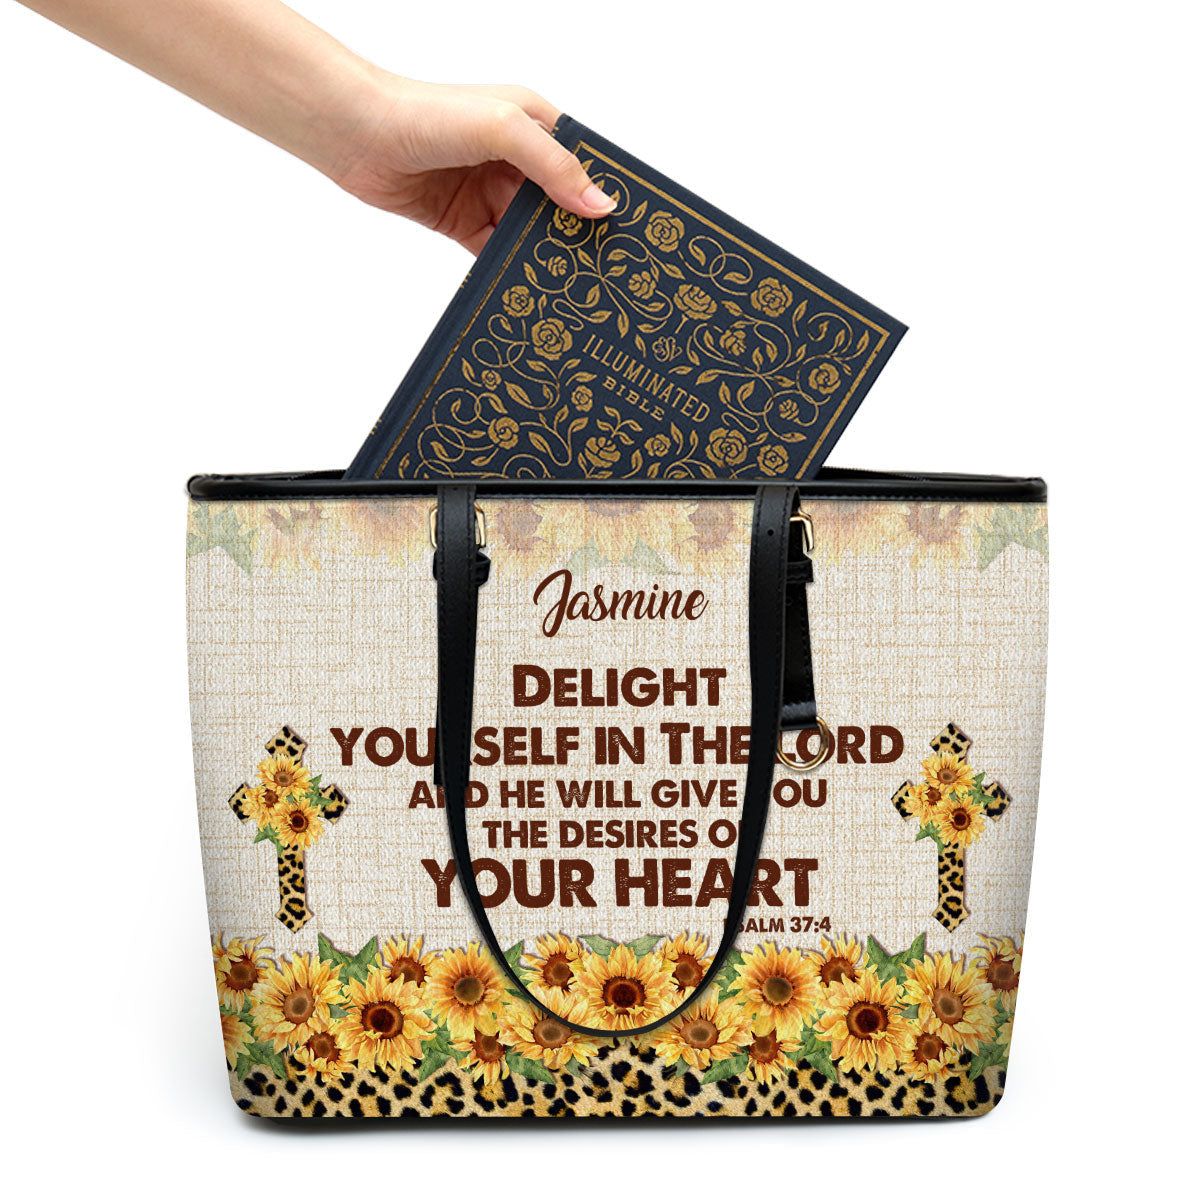 Delight Yourself In The Lord Psalm 374 Sunflower And Cross Personalized Large Leather Tote Bag - Christian Gifts For Women